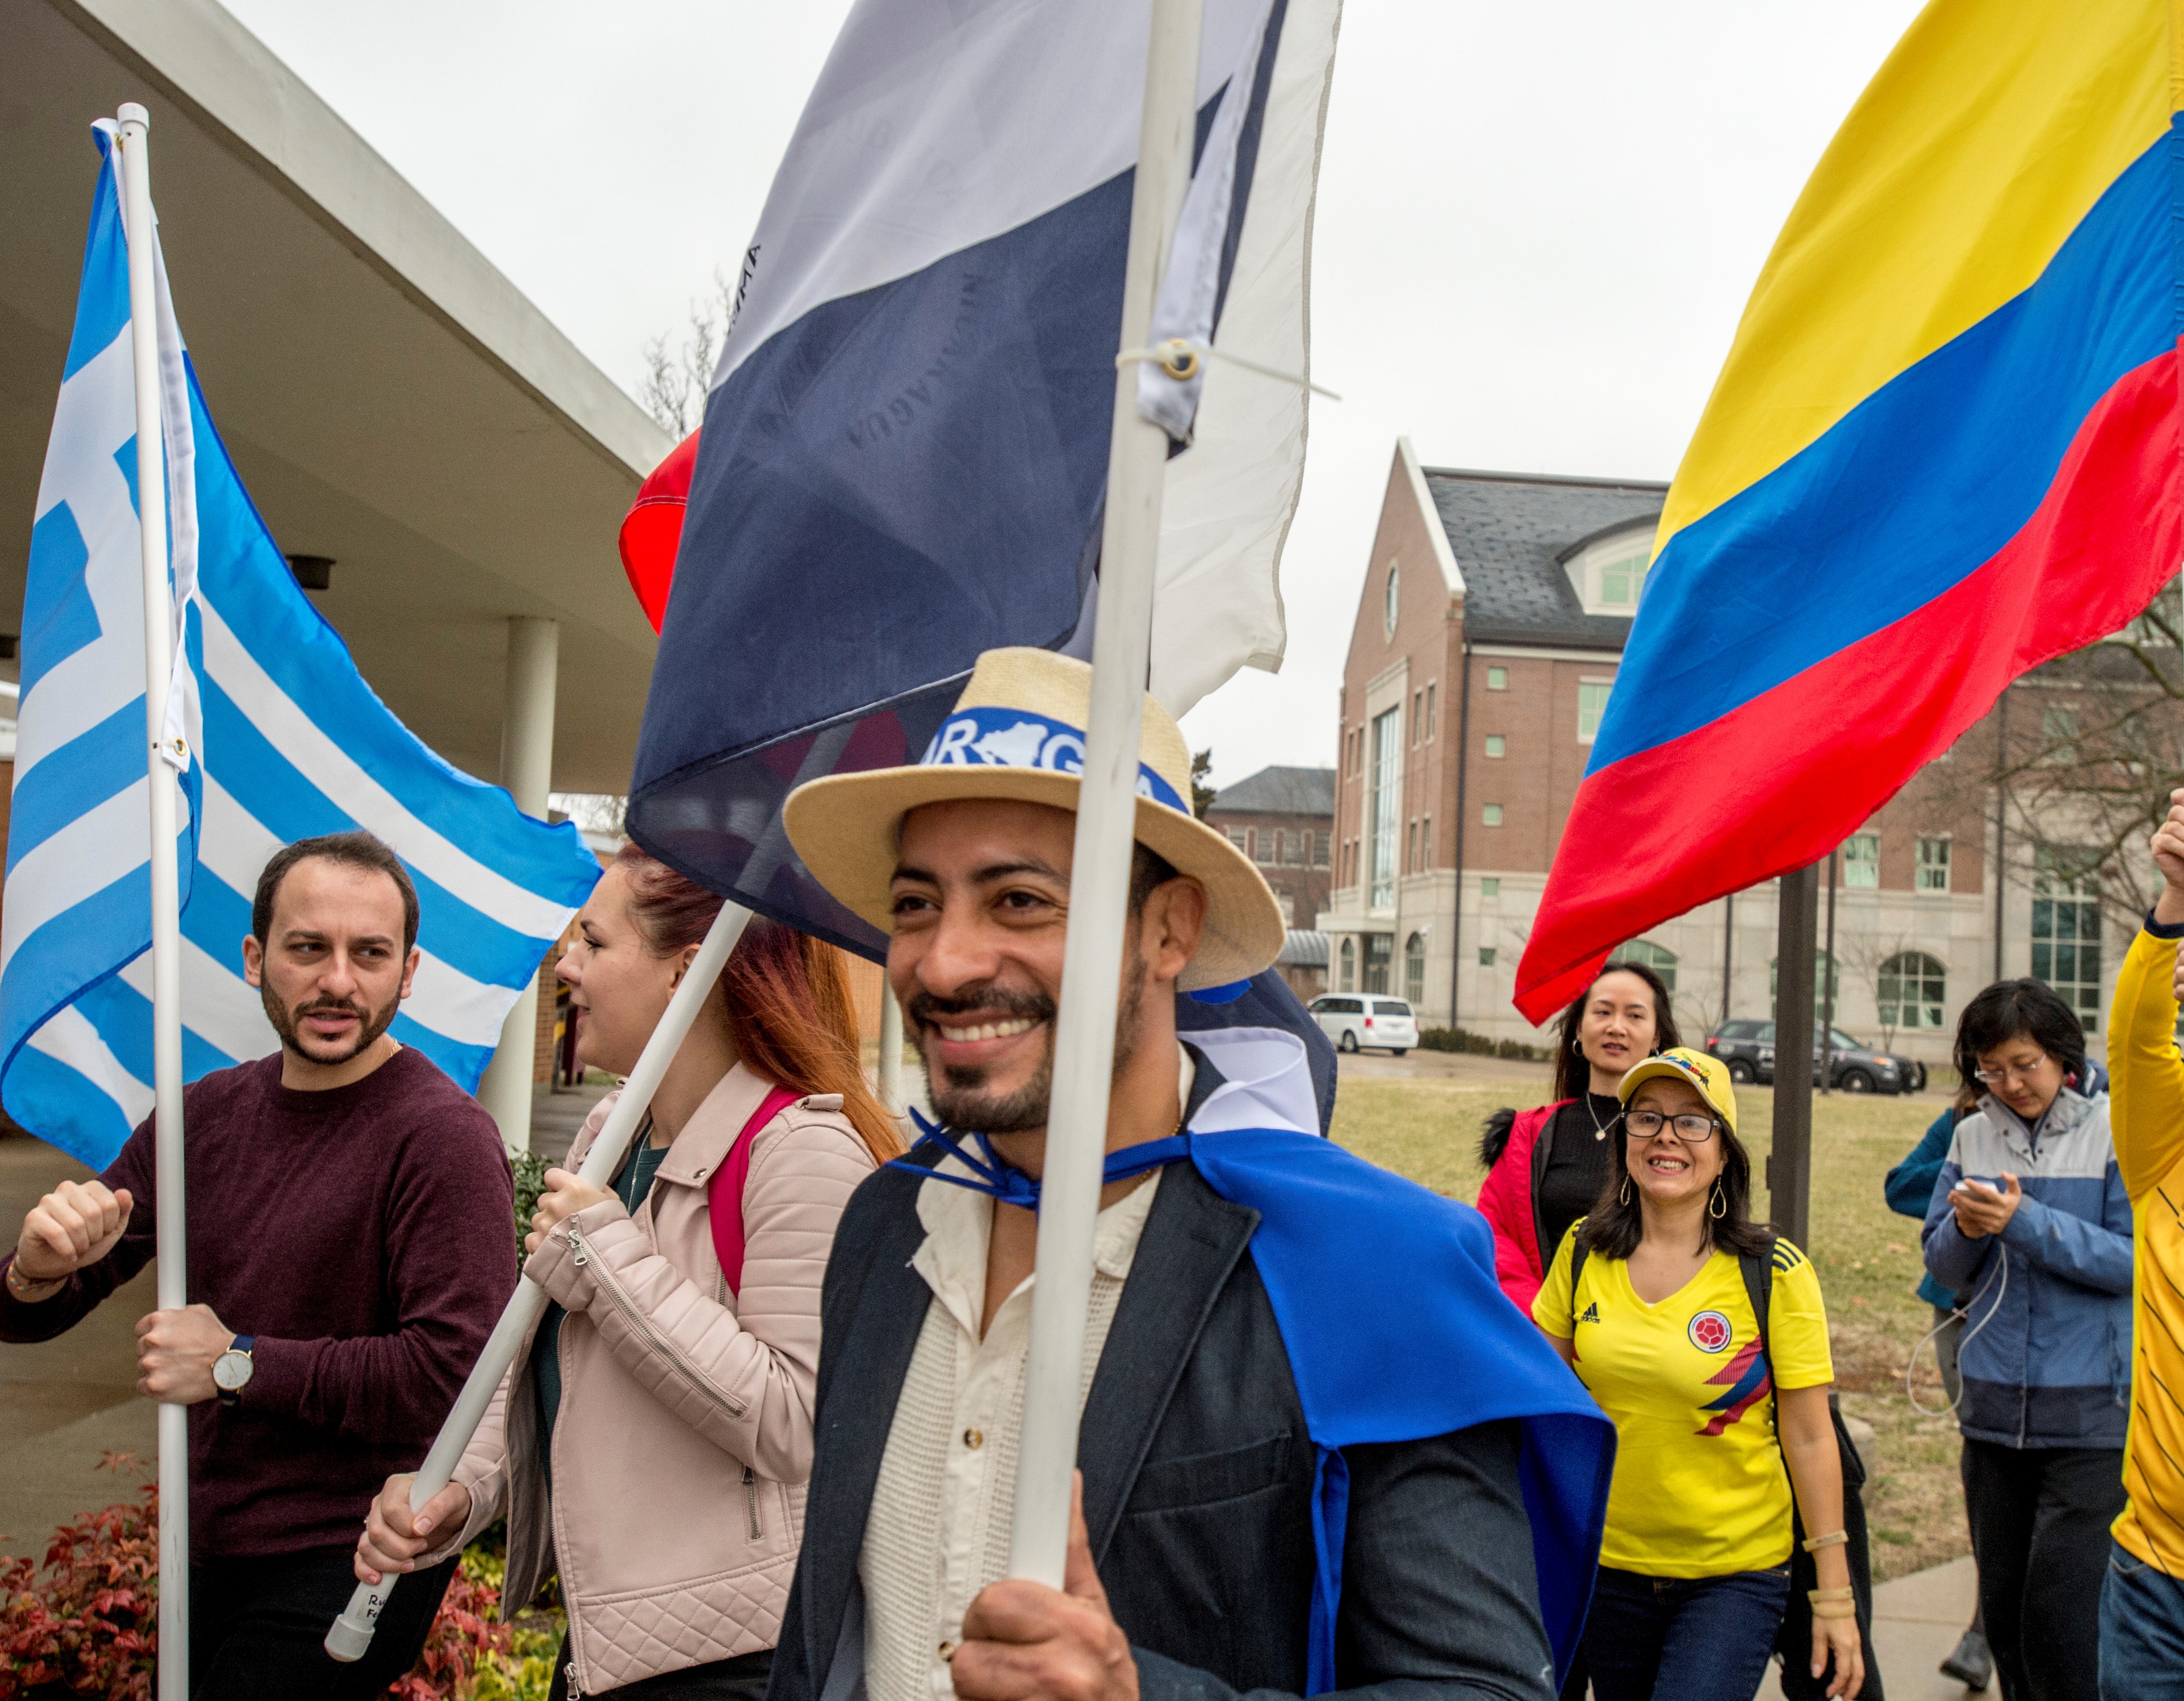 SIU students gathered on campus waving international flags in celebration